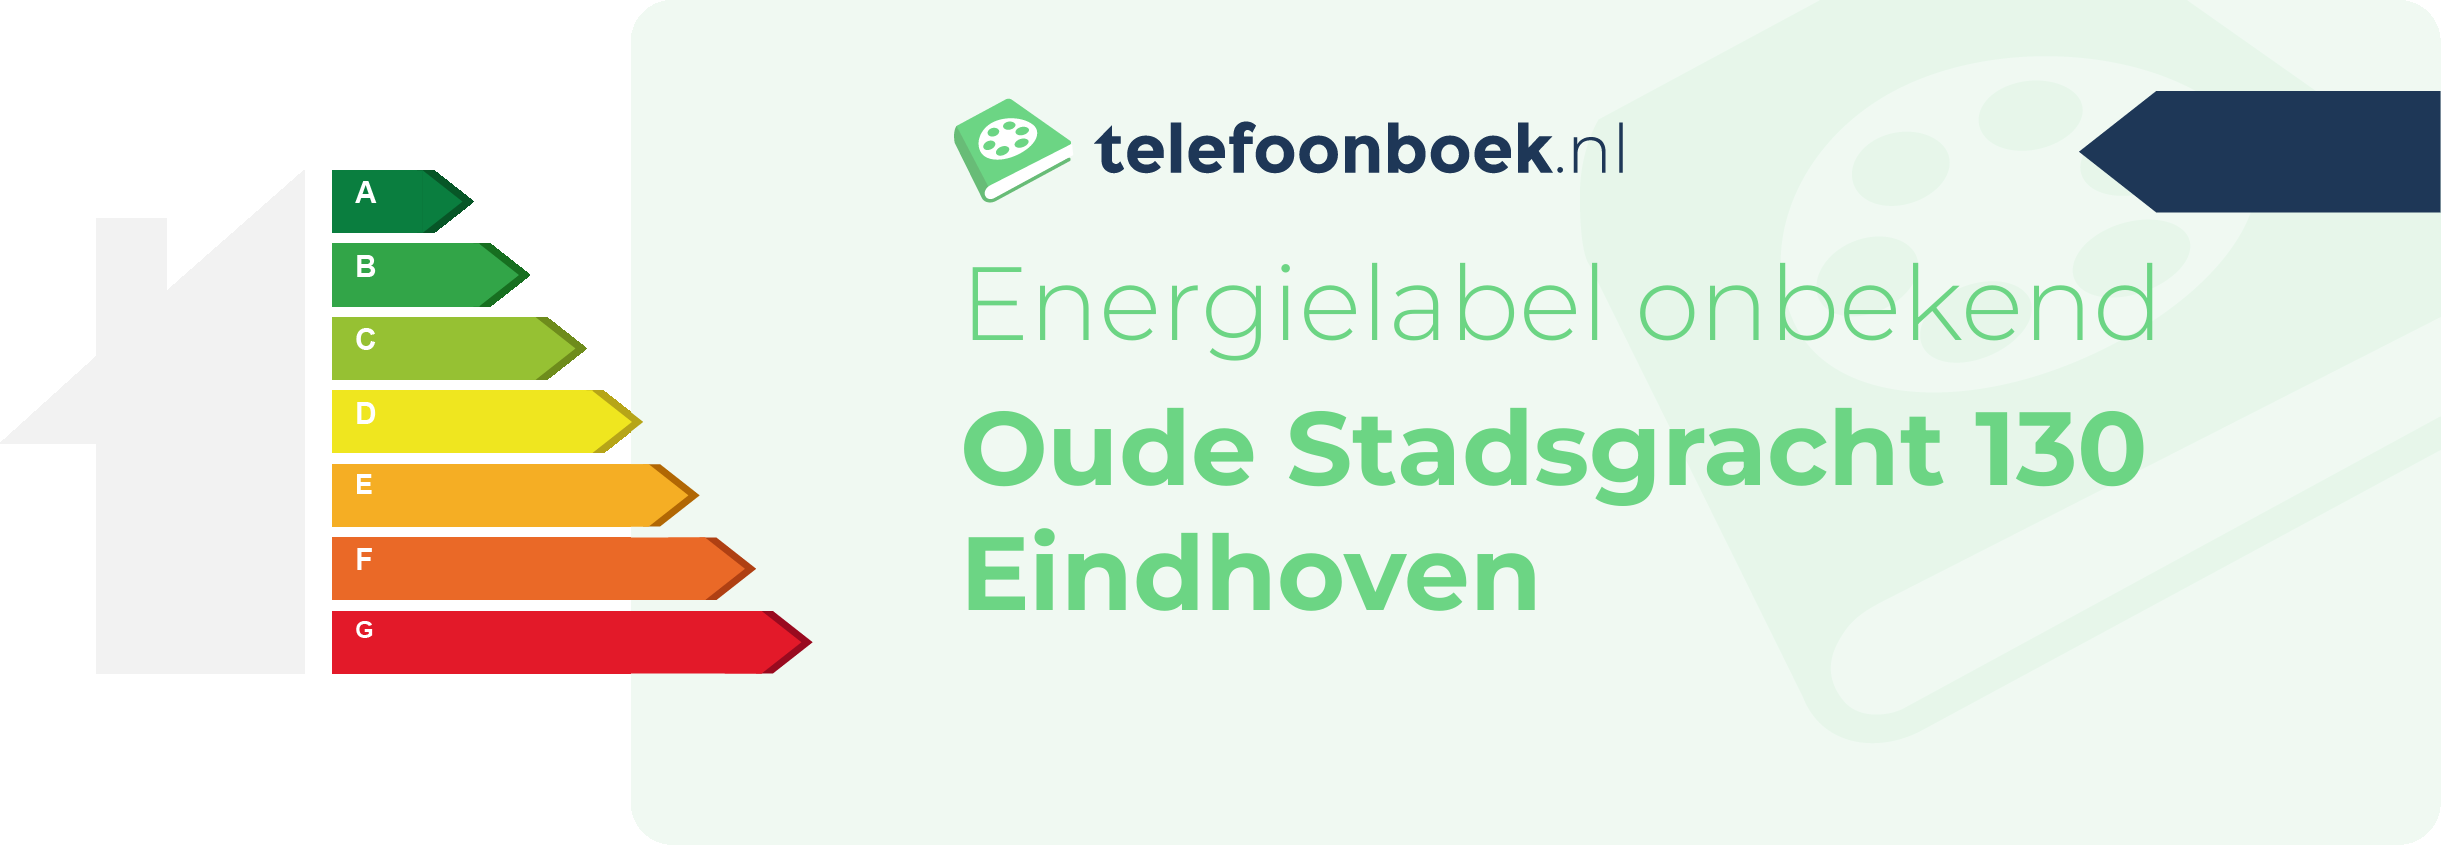 Energielabel Oude Stadsgracht 130 Eindhoven